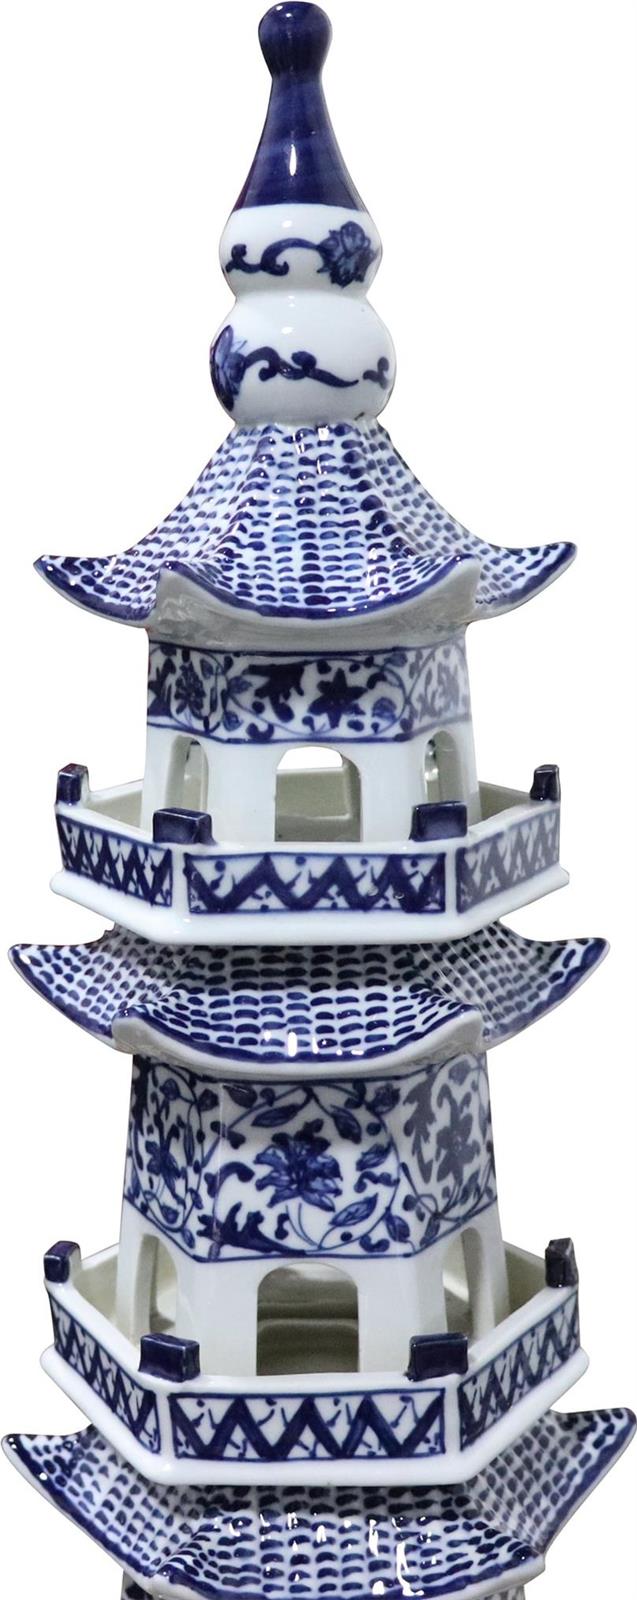 Pagoda Sculpture Twisted Vine Abstract 7-Tier Blue White Ceramic Handmade-Image 2